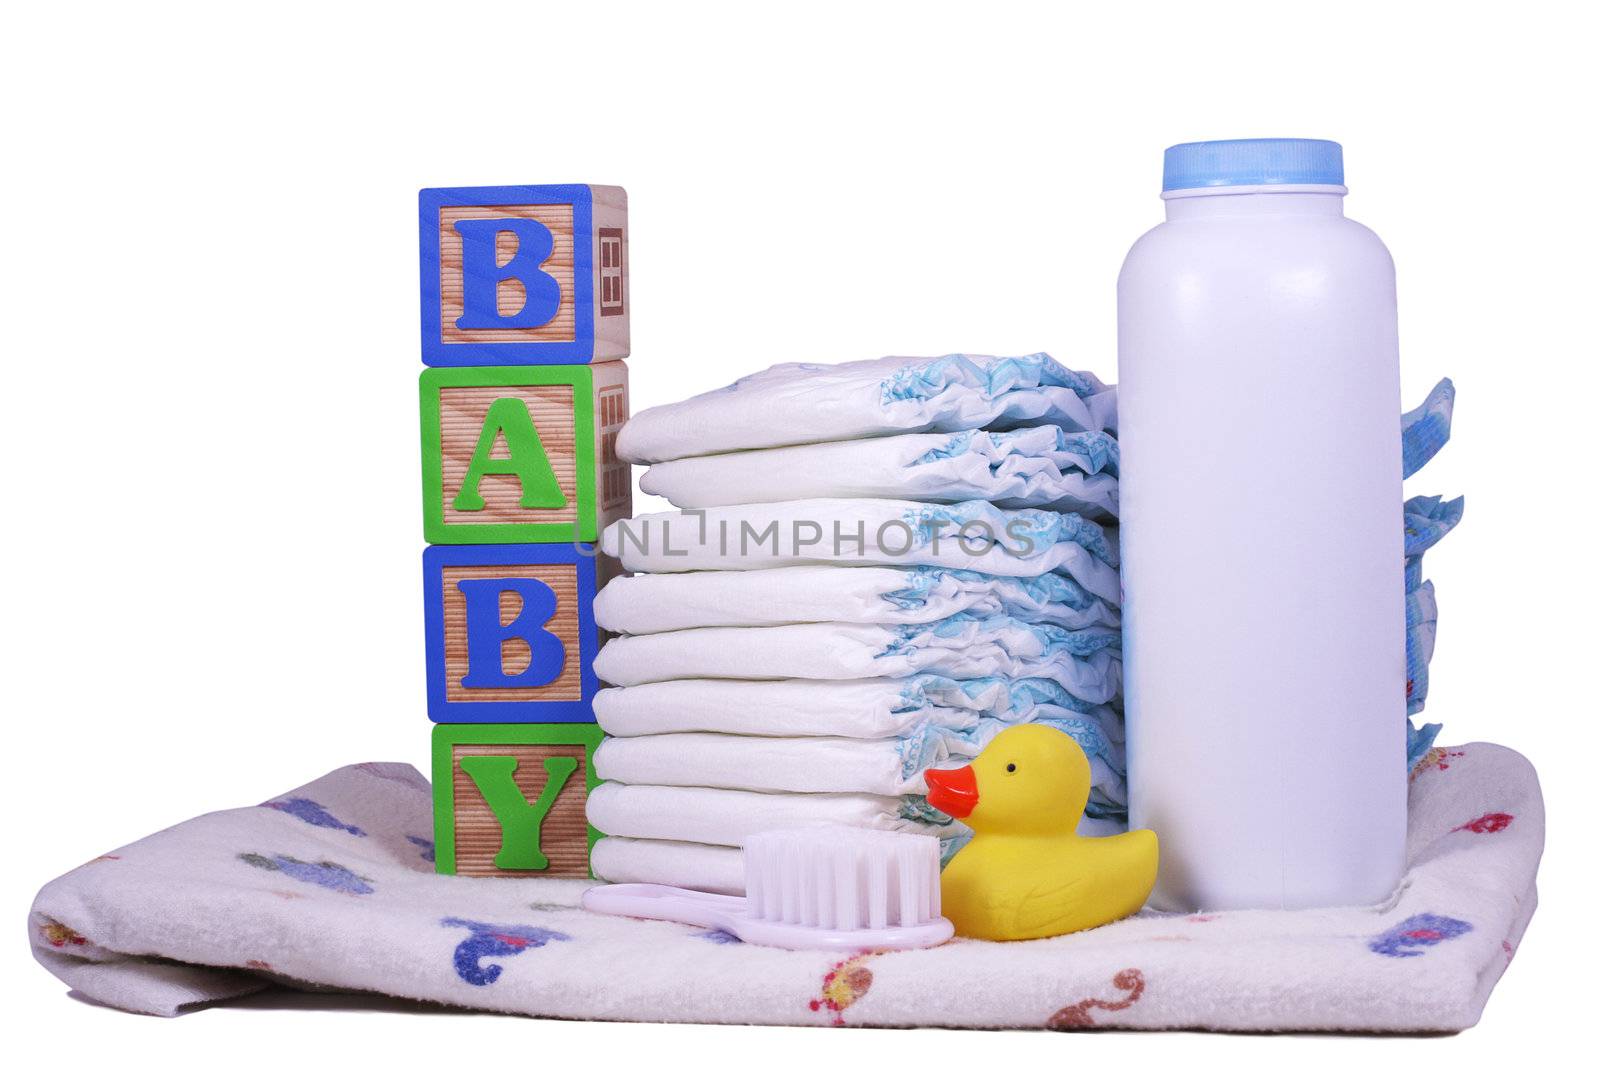 Items for a new baby, diapers, powder, receiving blanket, rubber duck, and brush isolated on white